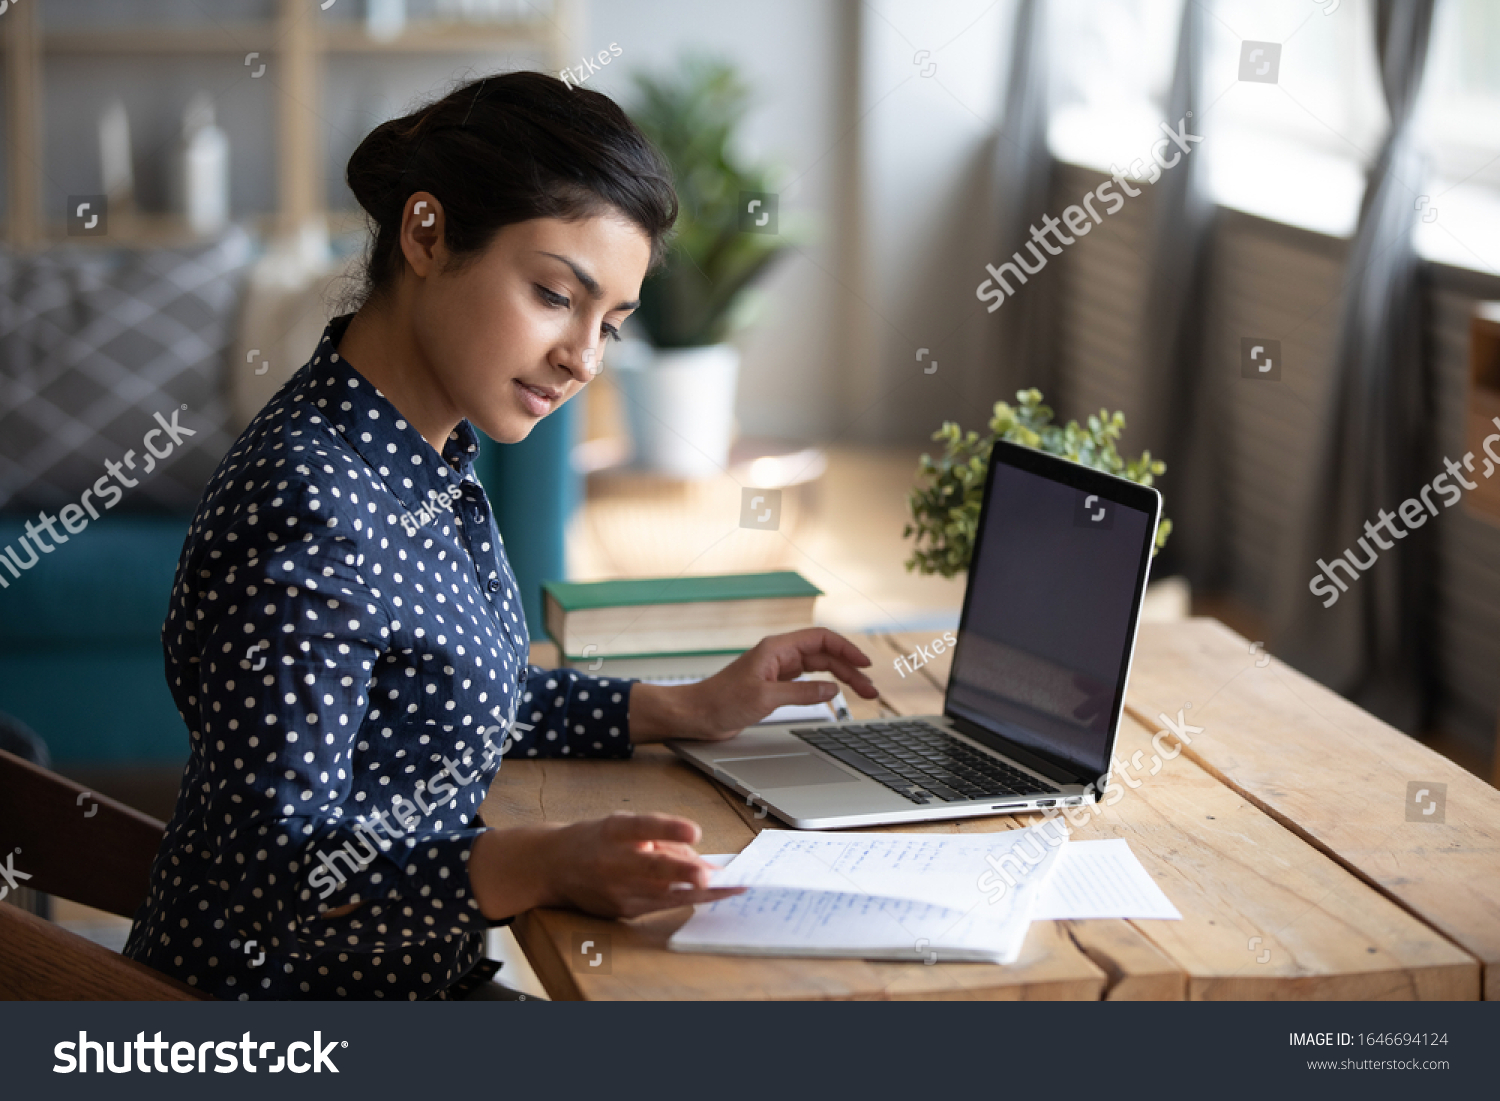 Millennial Indian girl sit at desk in living room study on laptop making notes, concentrated young woman work on computer write in notebook, take online course or training at home, education concept #1646694124